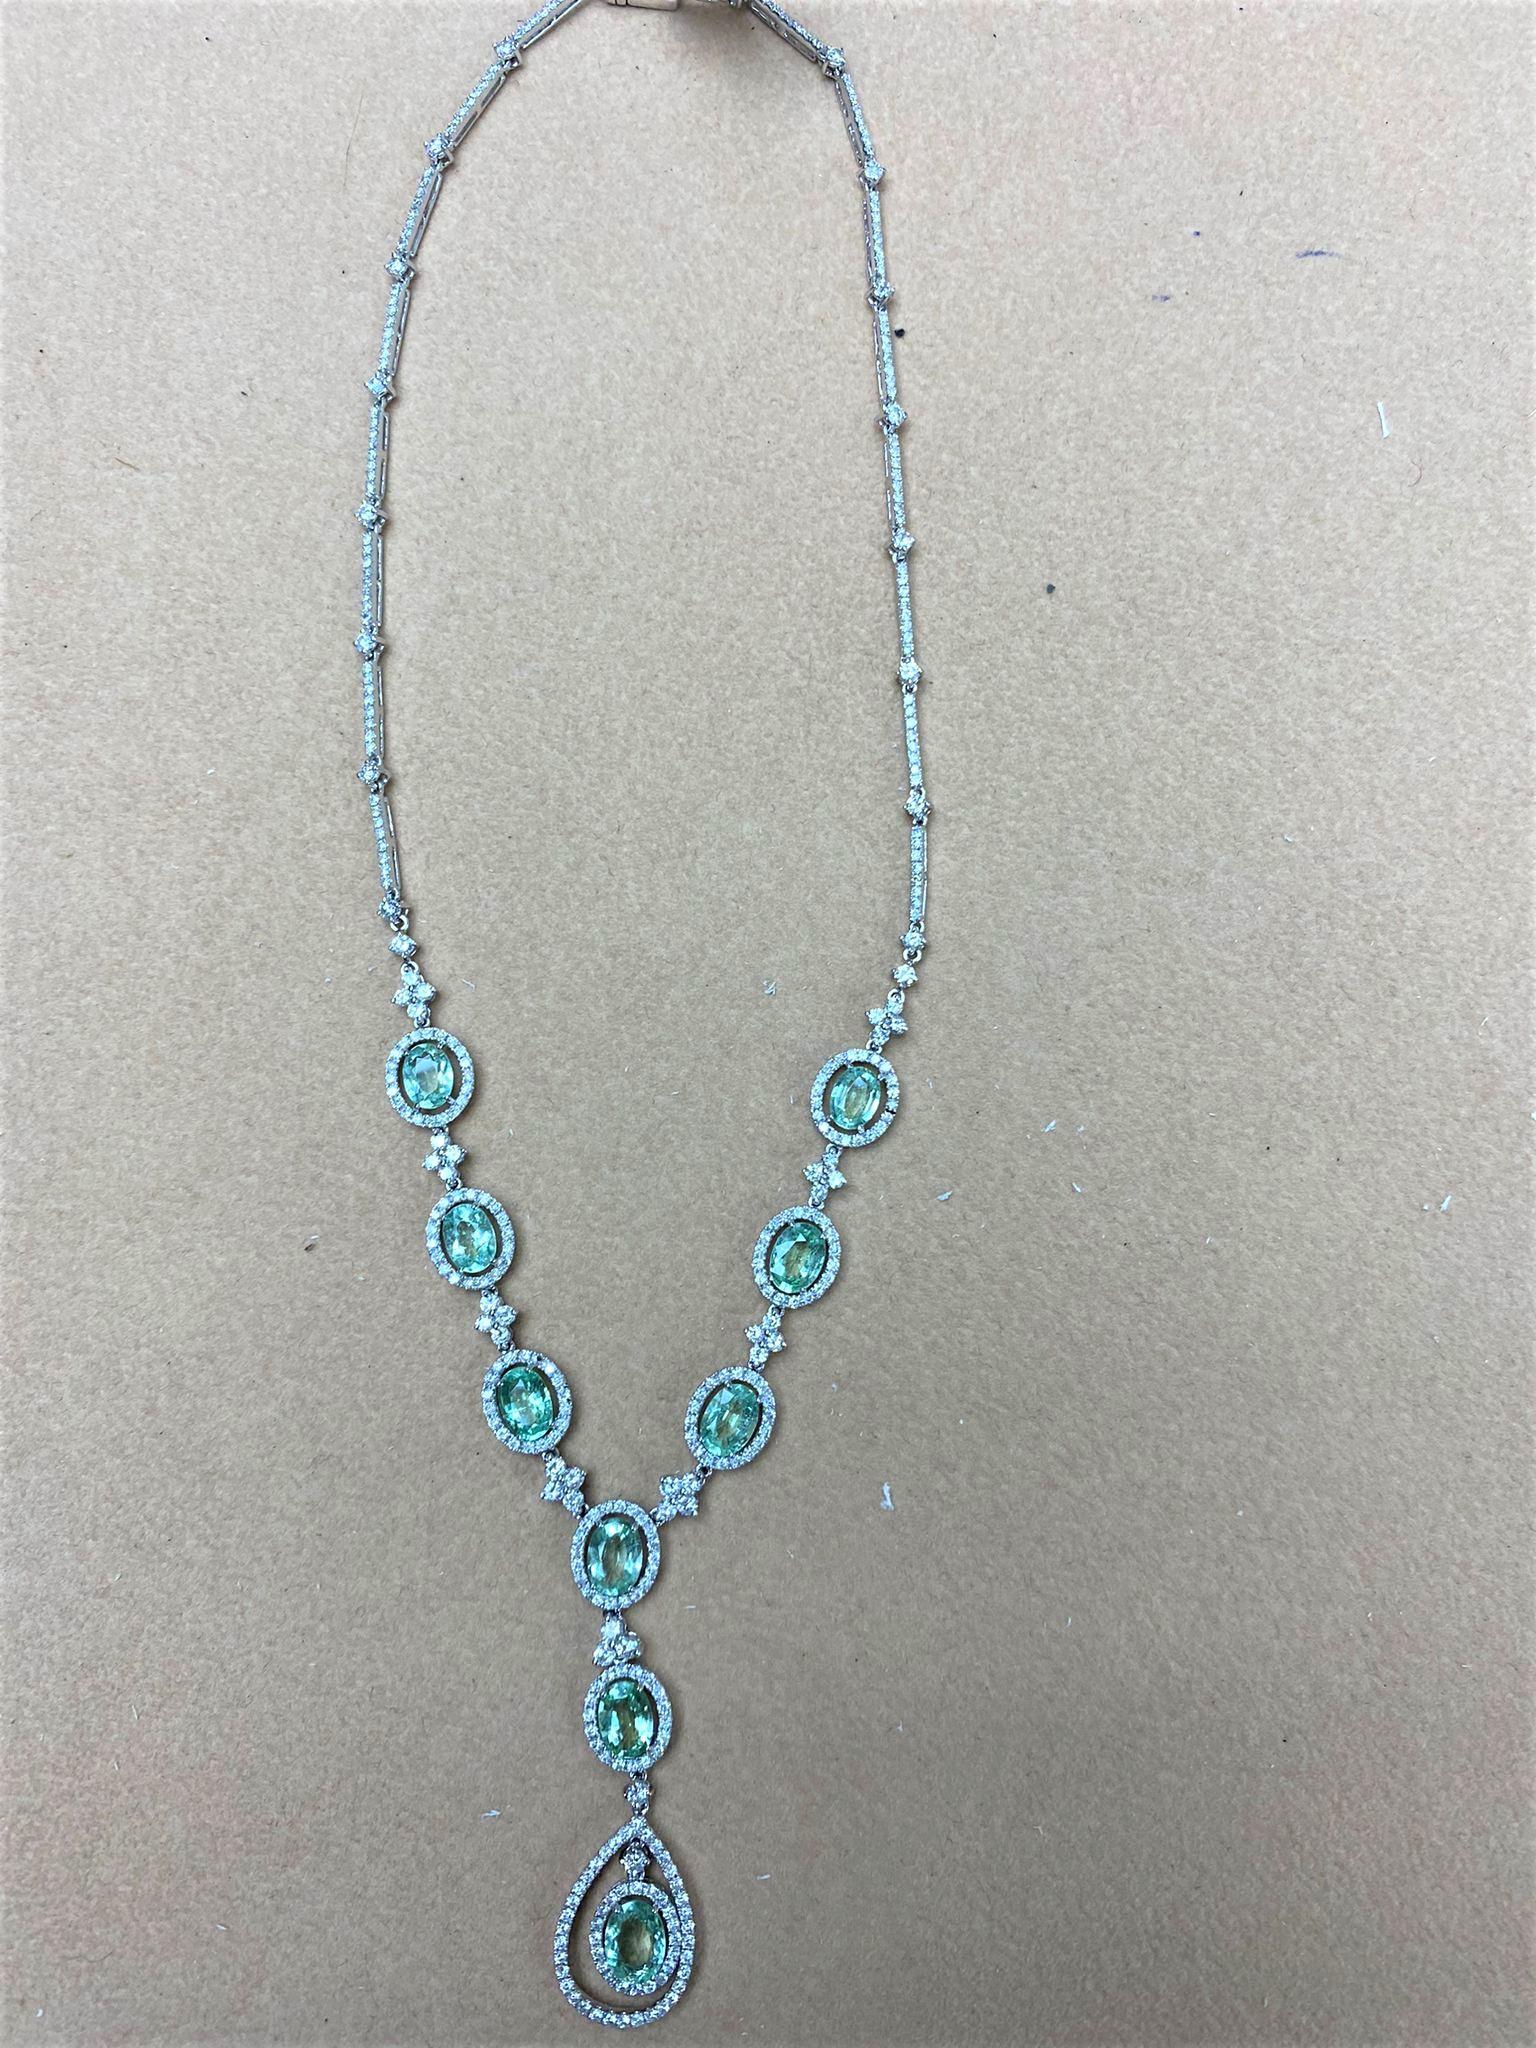 The Following Items we are offering is a Rare Important Gorgeous 18KT White Gold Glittering Diamond and Paraiba Tourmaline Necklace!!!! Necklace features Outstanding Multi Shaped Shimmering and Glittering Extremely Rare Fancy Oval Cut Paraiba